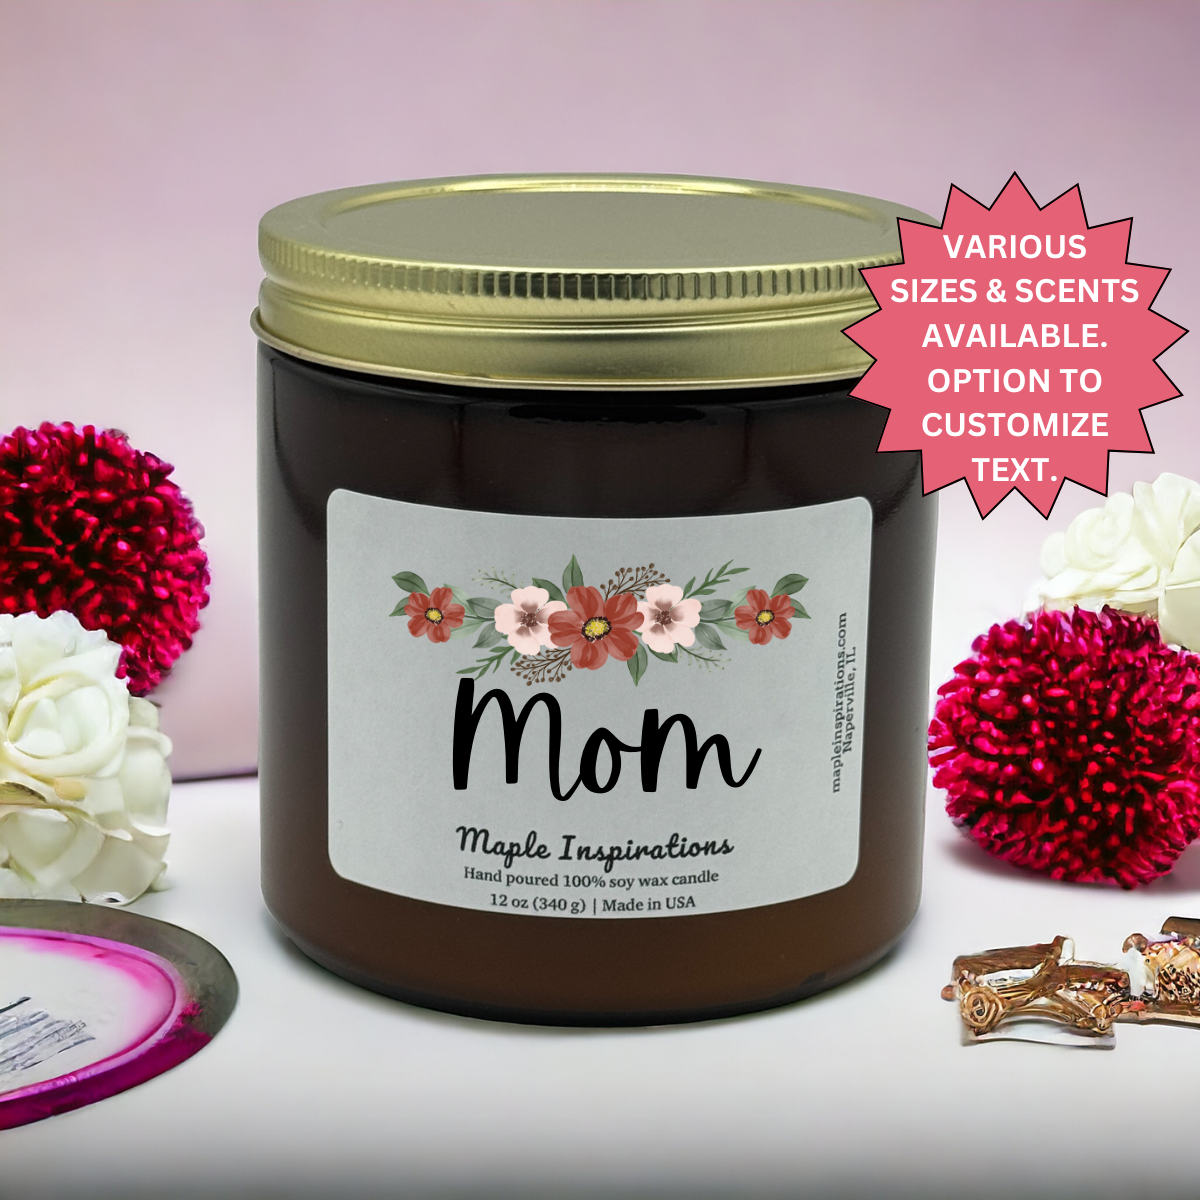 Mom Scented Candle Gift For Mom, Mother's Day Gift, Mom Gift, Mothers Day Candle, Mom Birthday Gift